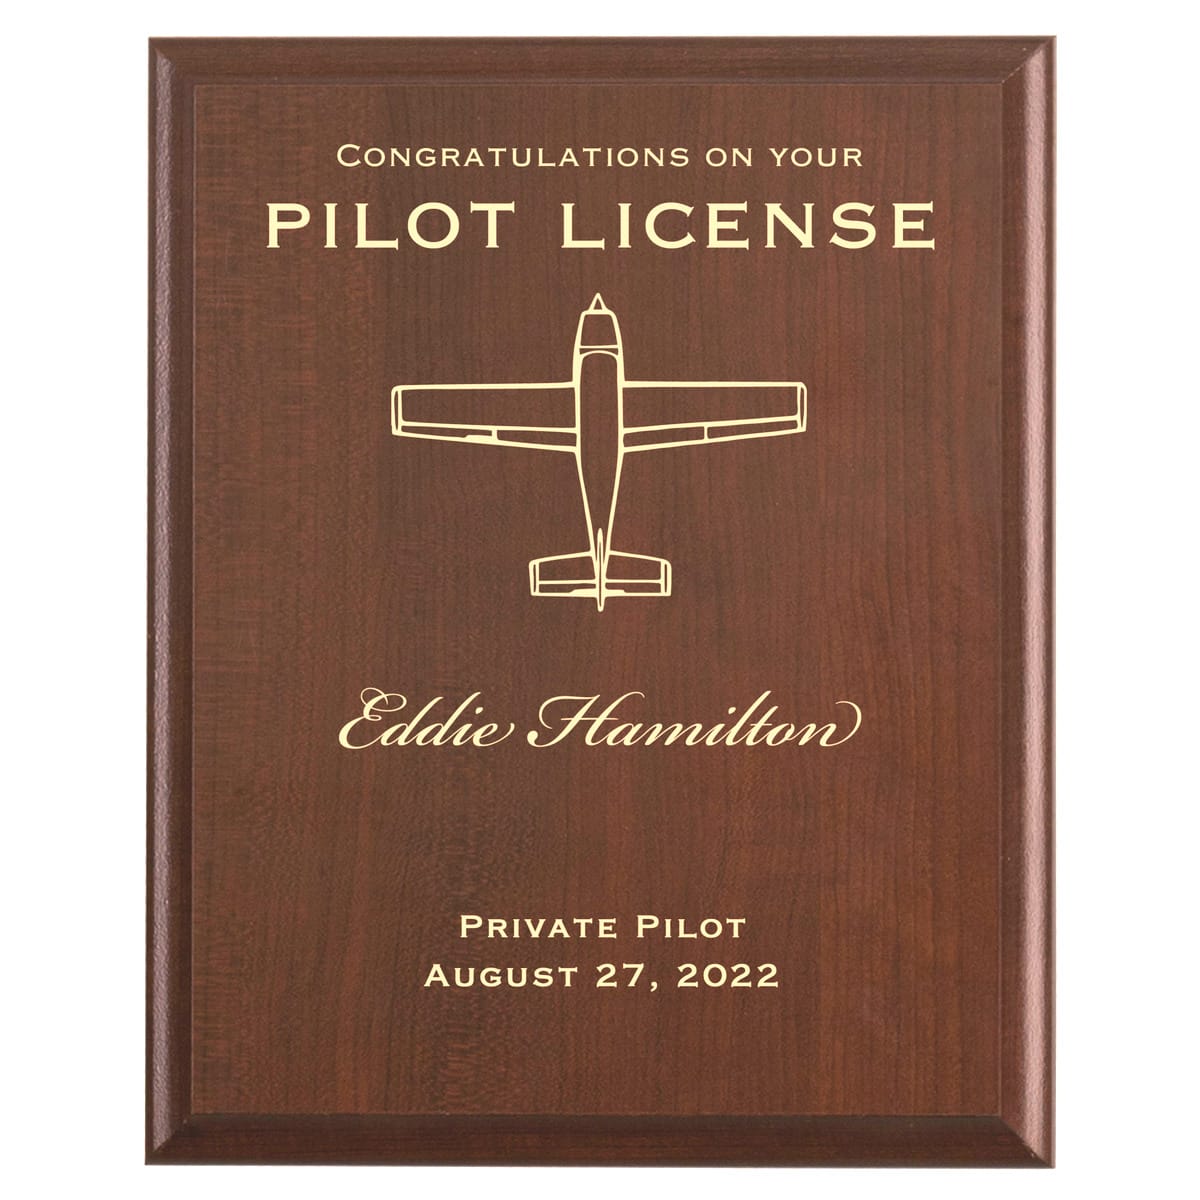 Plaque photo: New Pilot License Award design with free personalization. Wood style finish with customized text.